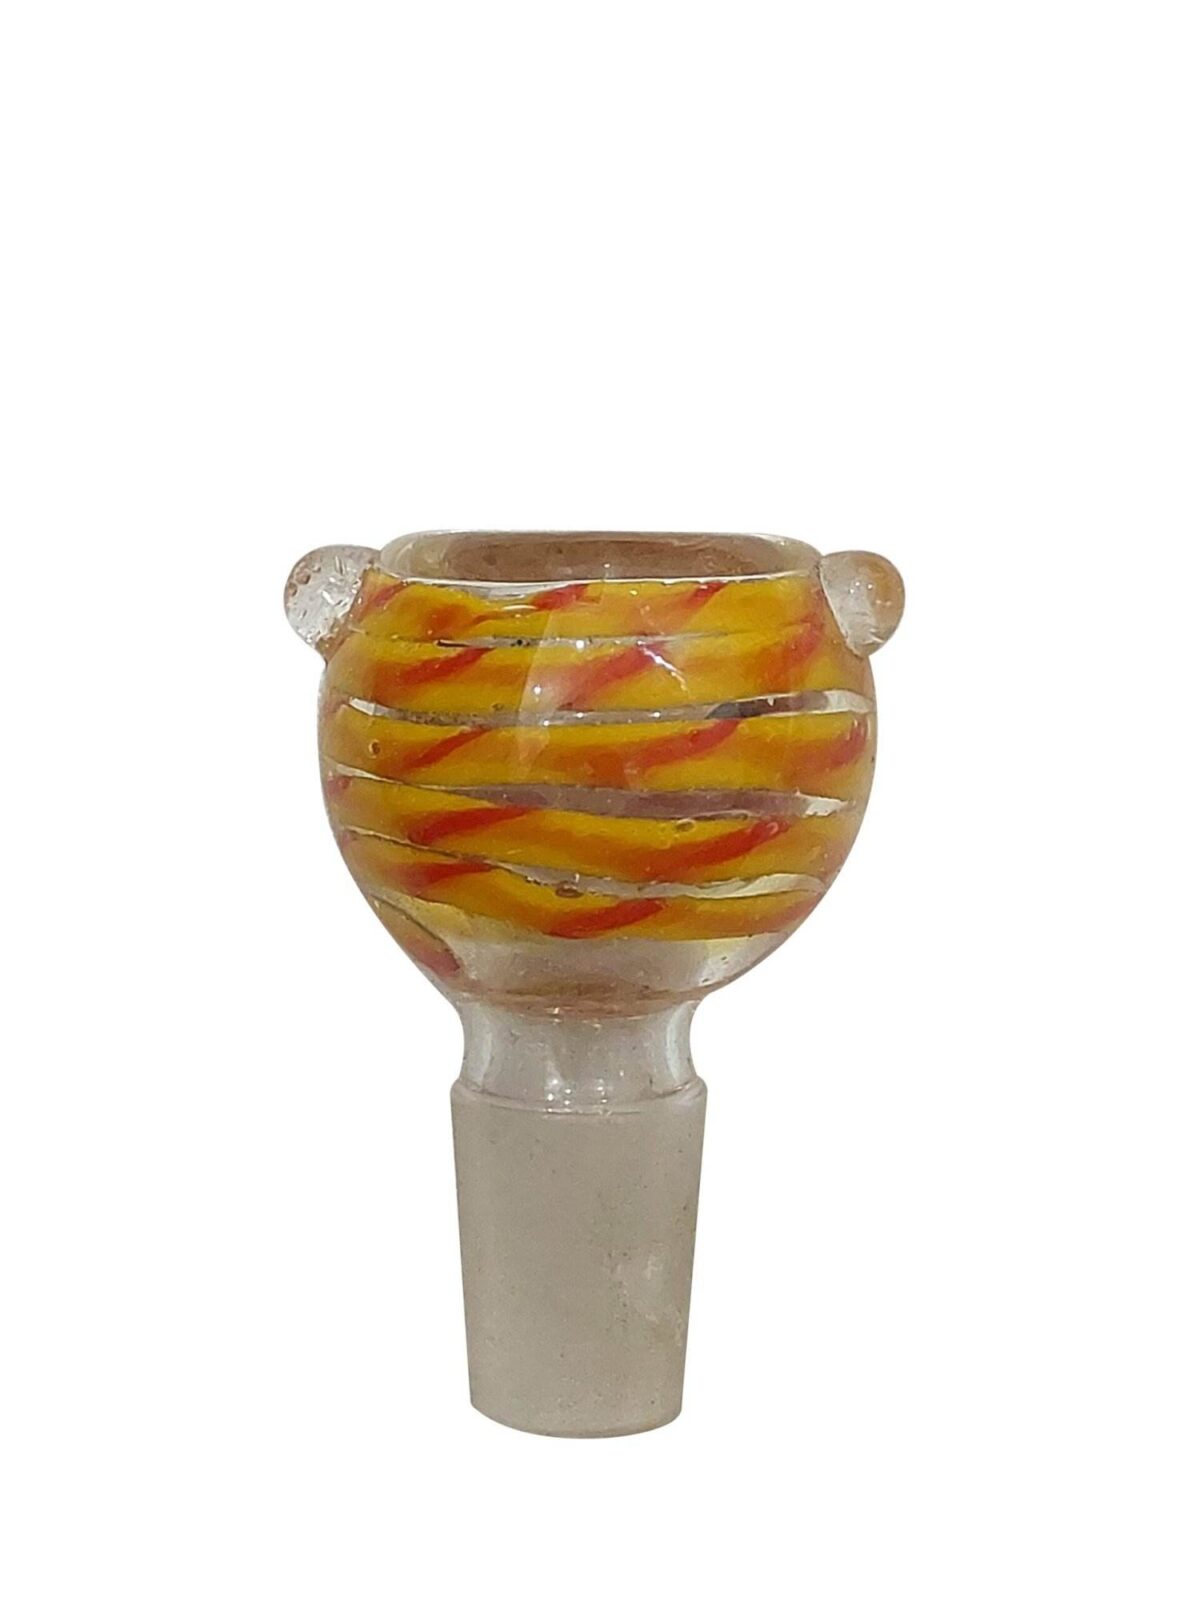 High-quality glass bong bowls online, 14mm and 19mm bong accessories India, Top-rated glass bong bowls Delhi, Affordable 14mm bong bowls online, 19mm glass bowls for smoking accessories, Shop glass bong bowls Delhi NCR, Premium glass bowls for bongs online, Exclusive 14/19mm bong bowls India, Glass bong accessories online India, Best online store for glass bowls Delhi,14/19mm glass bowls for sale India, bong parts online in delhi ncr india